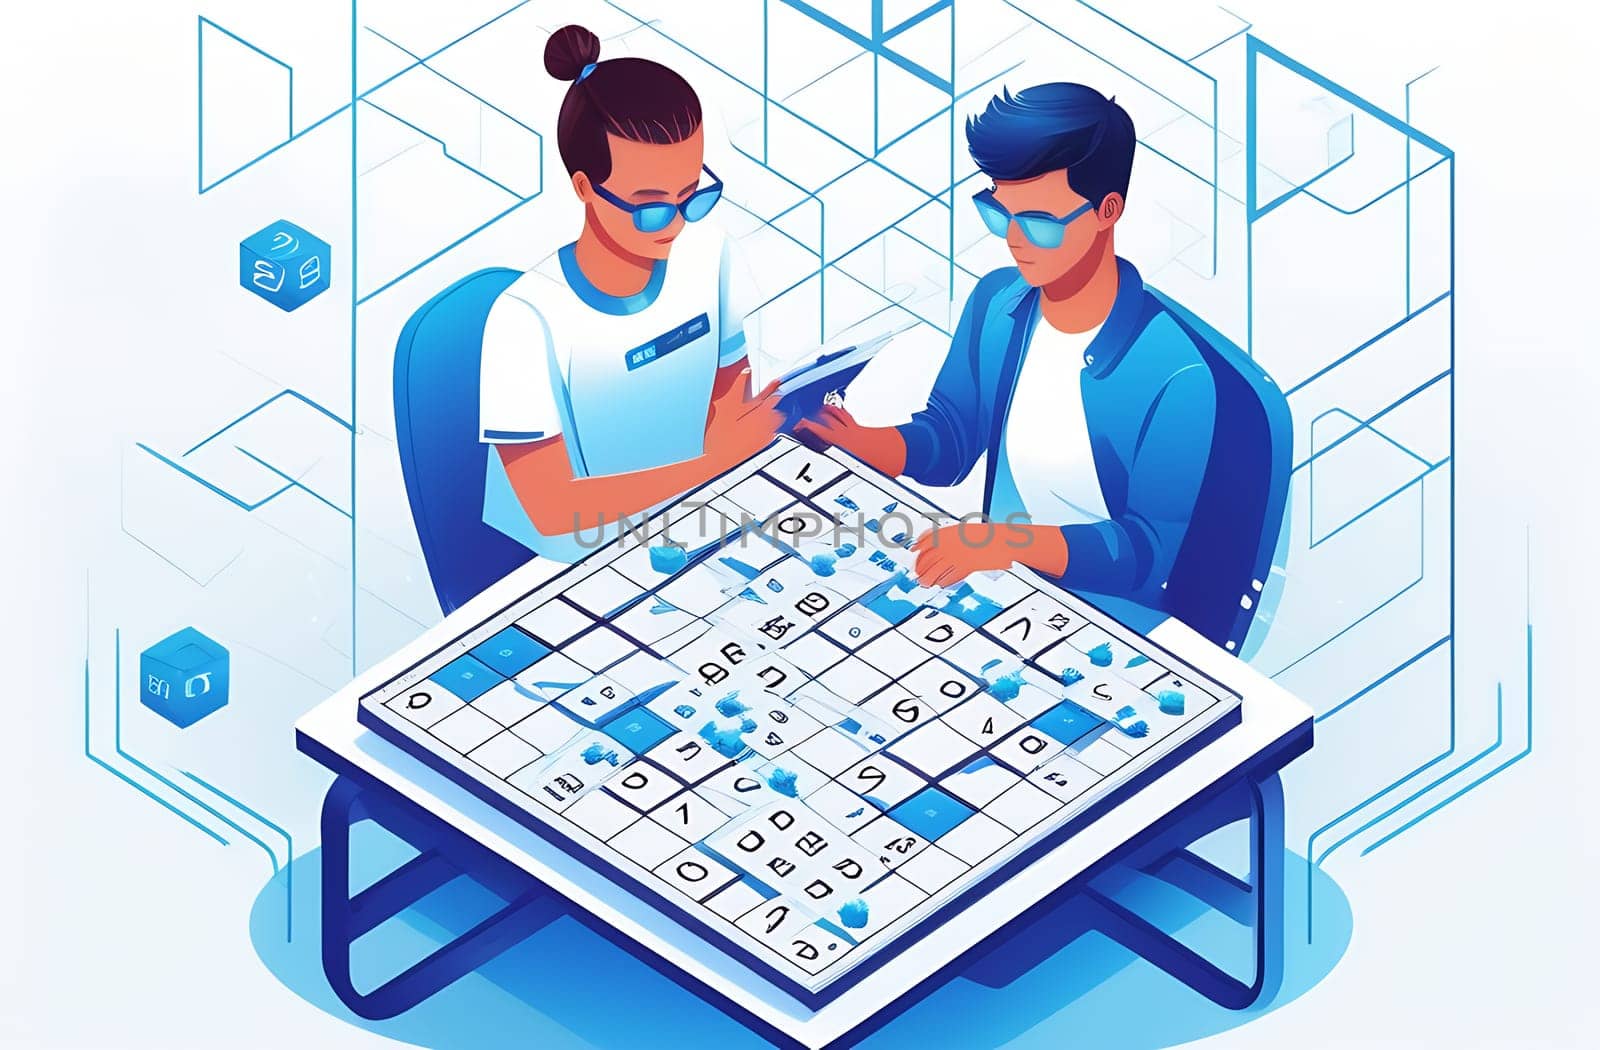 Two teenagers solve a Japanese Sudoku crossword puzzle, illustration on a white background.